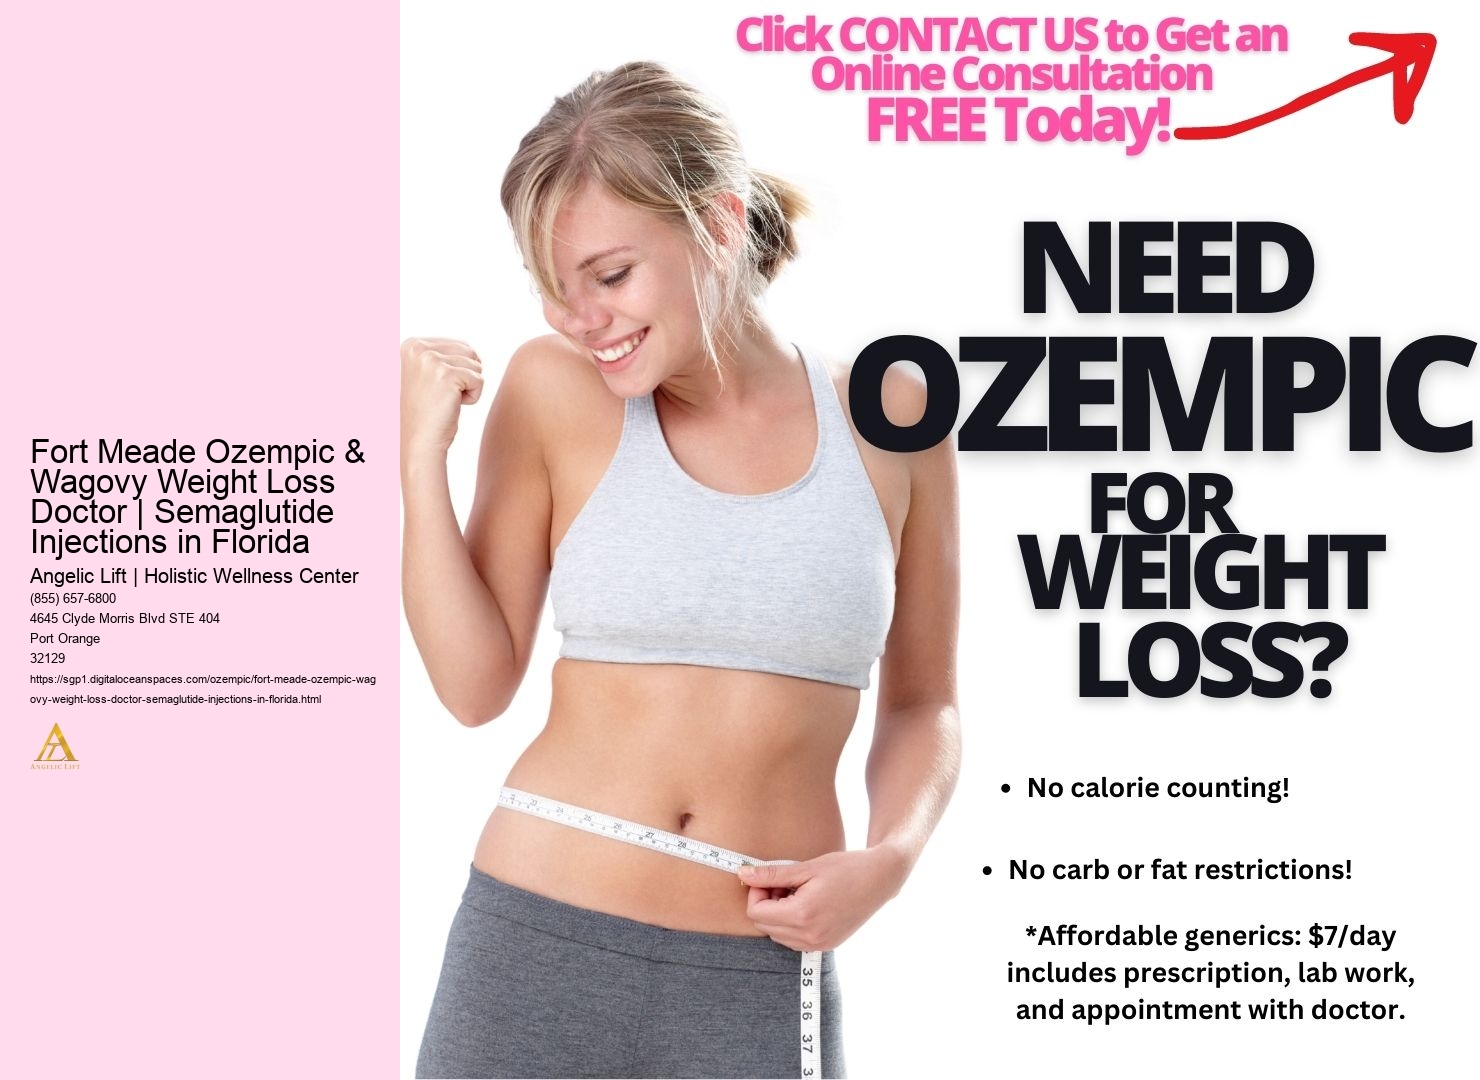 Fort Meade Ozempic & Wagovy Weight Loss Doctor | Semaglutide Injections in Florida